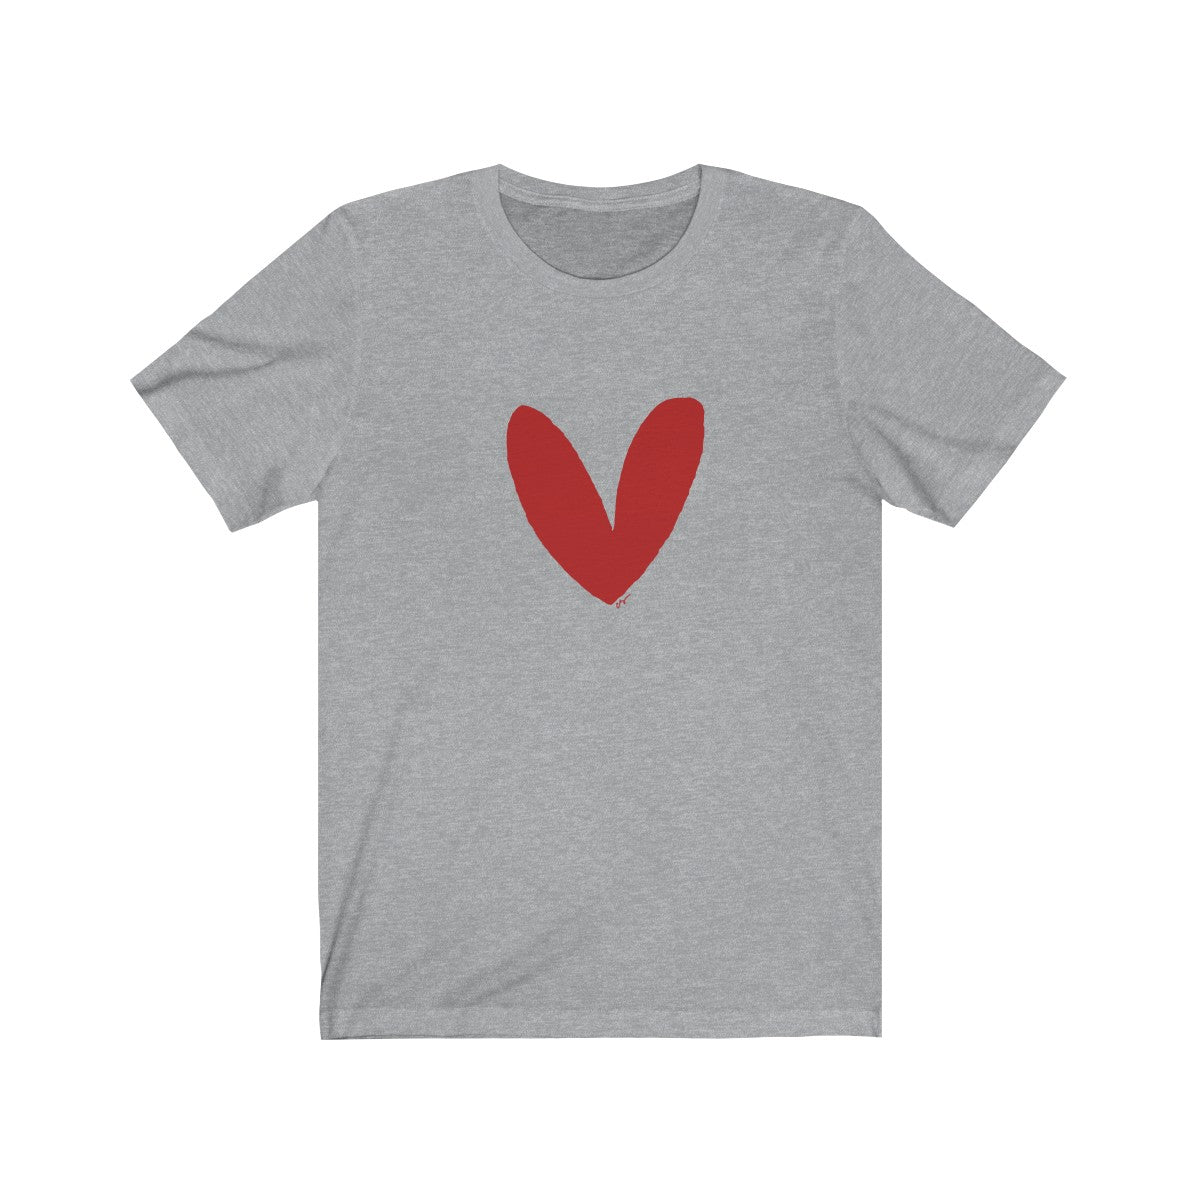 Have A Heart Adult Tee (Red Heart)